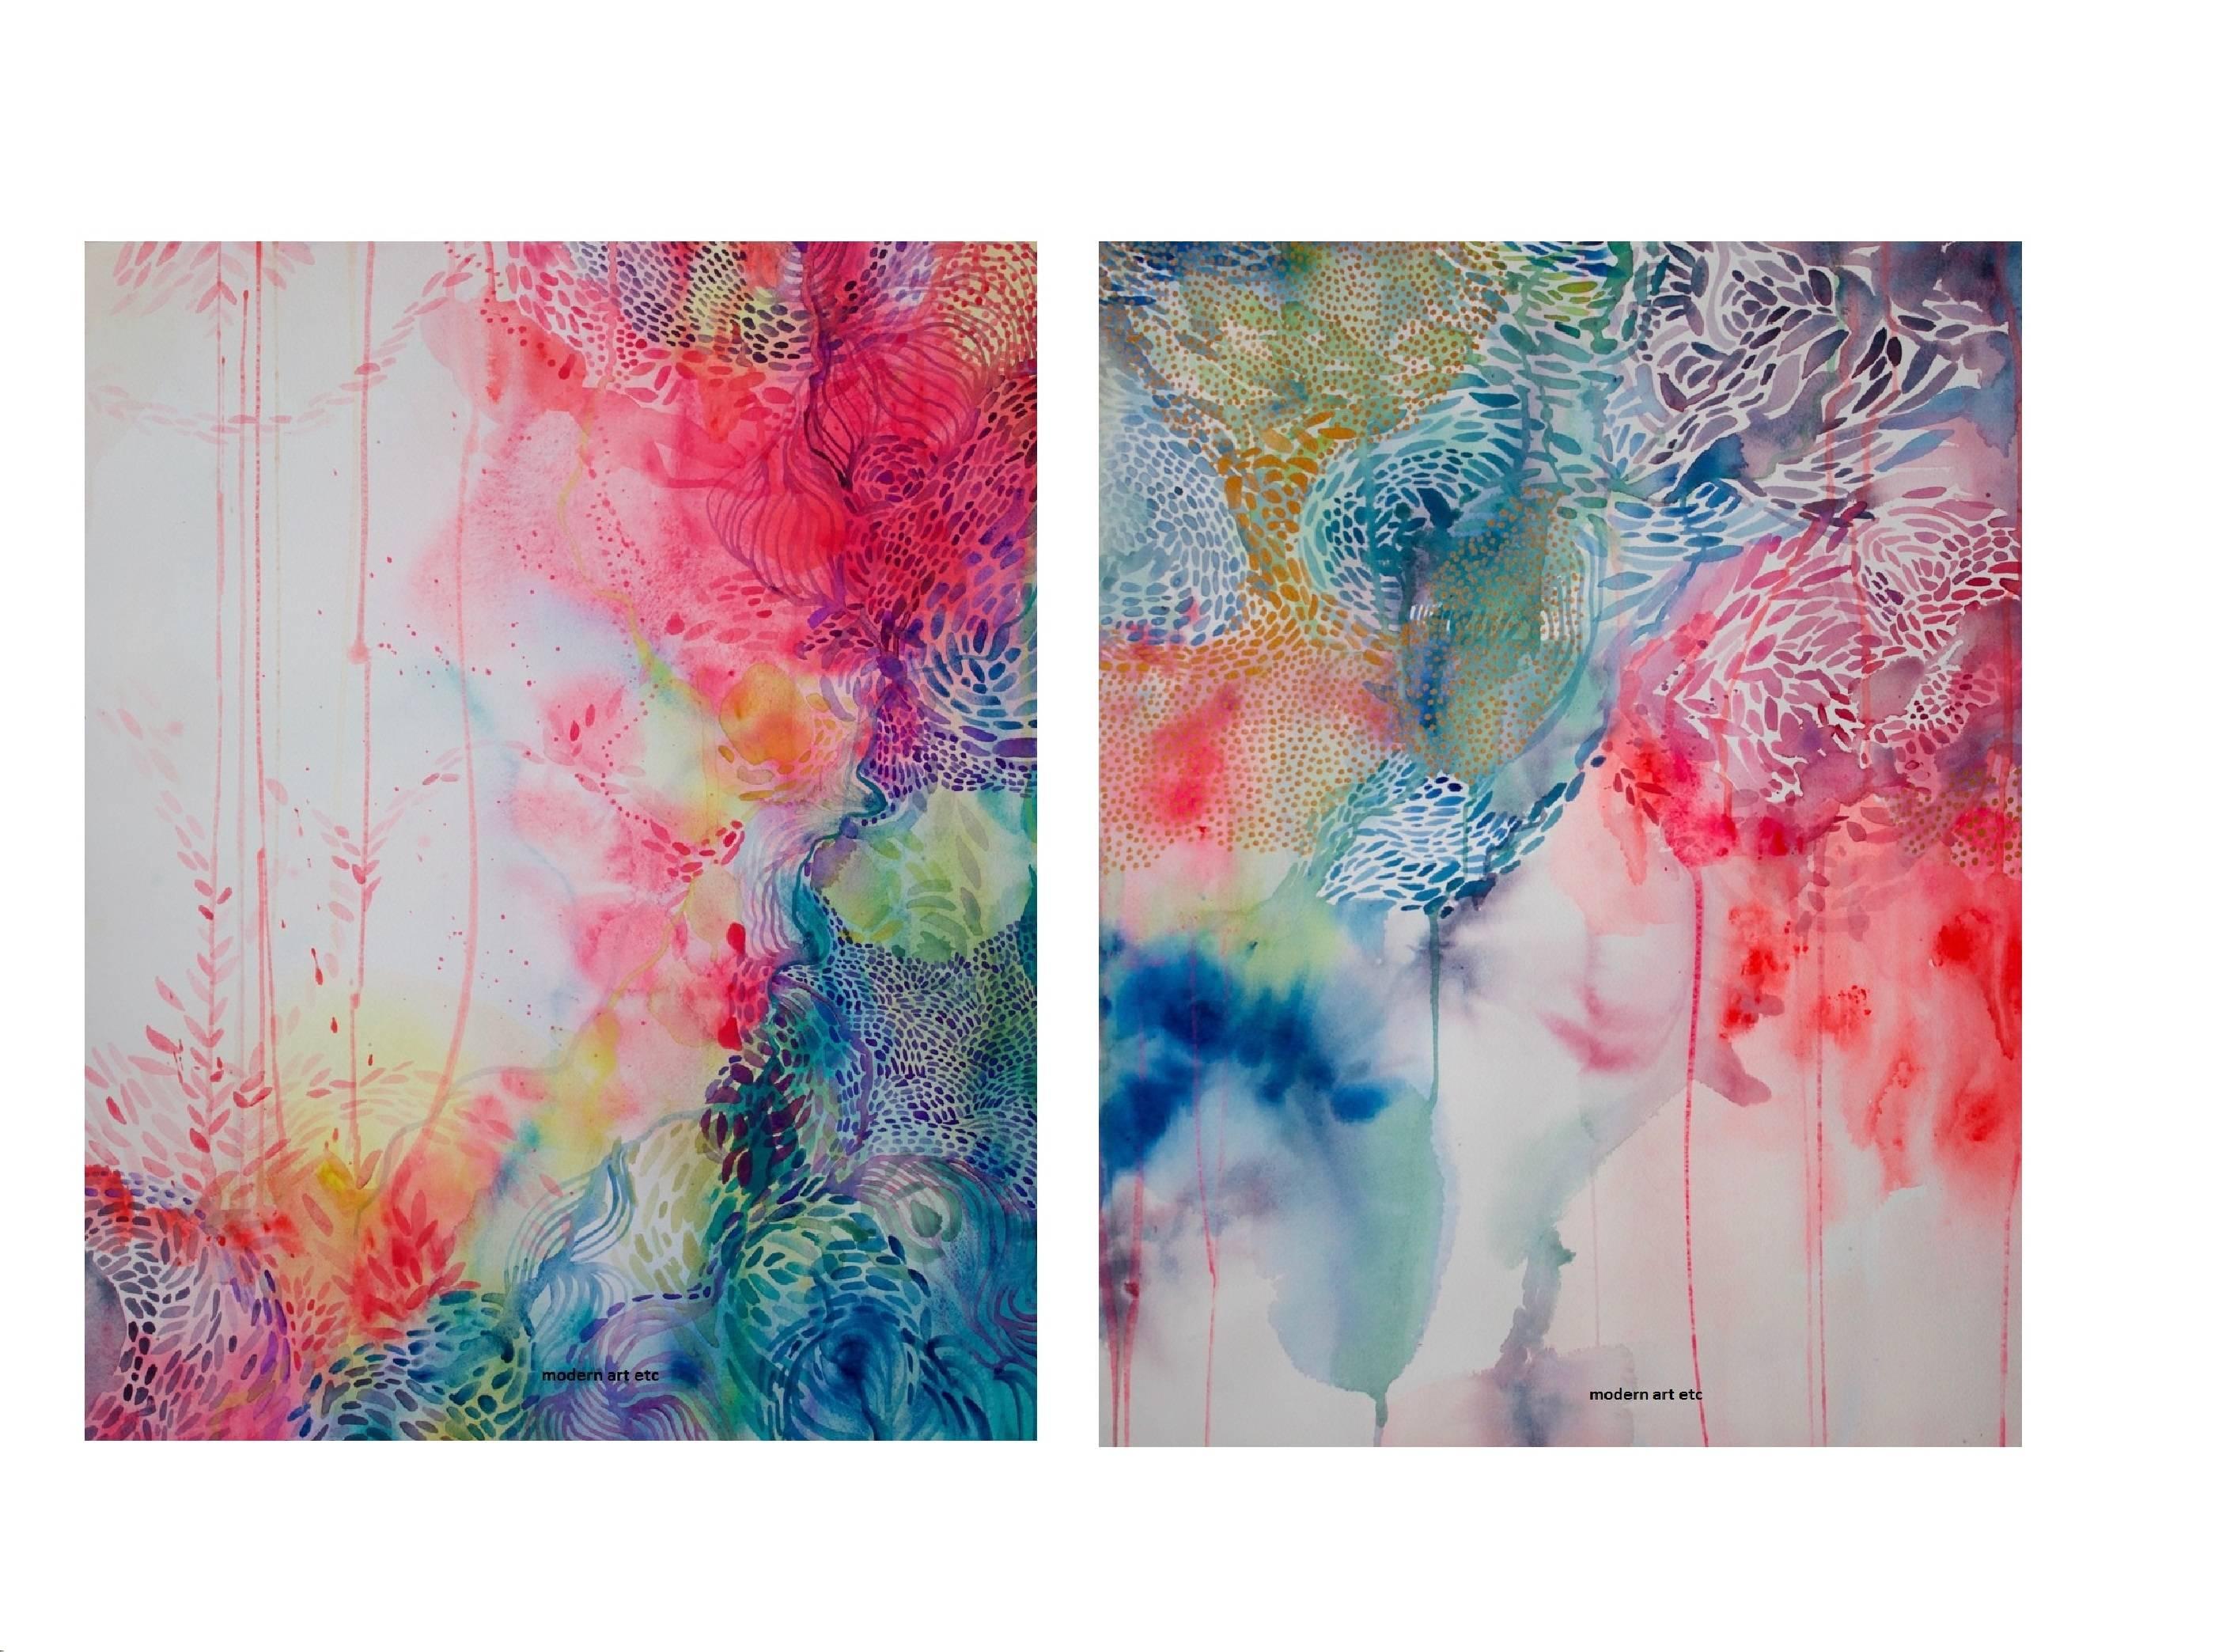 MAE Curates Figurative Painting - Large abstract watercolor with fine details - sold as a pair / diptych